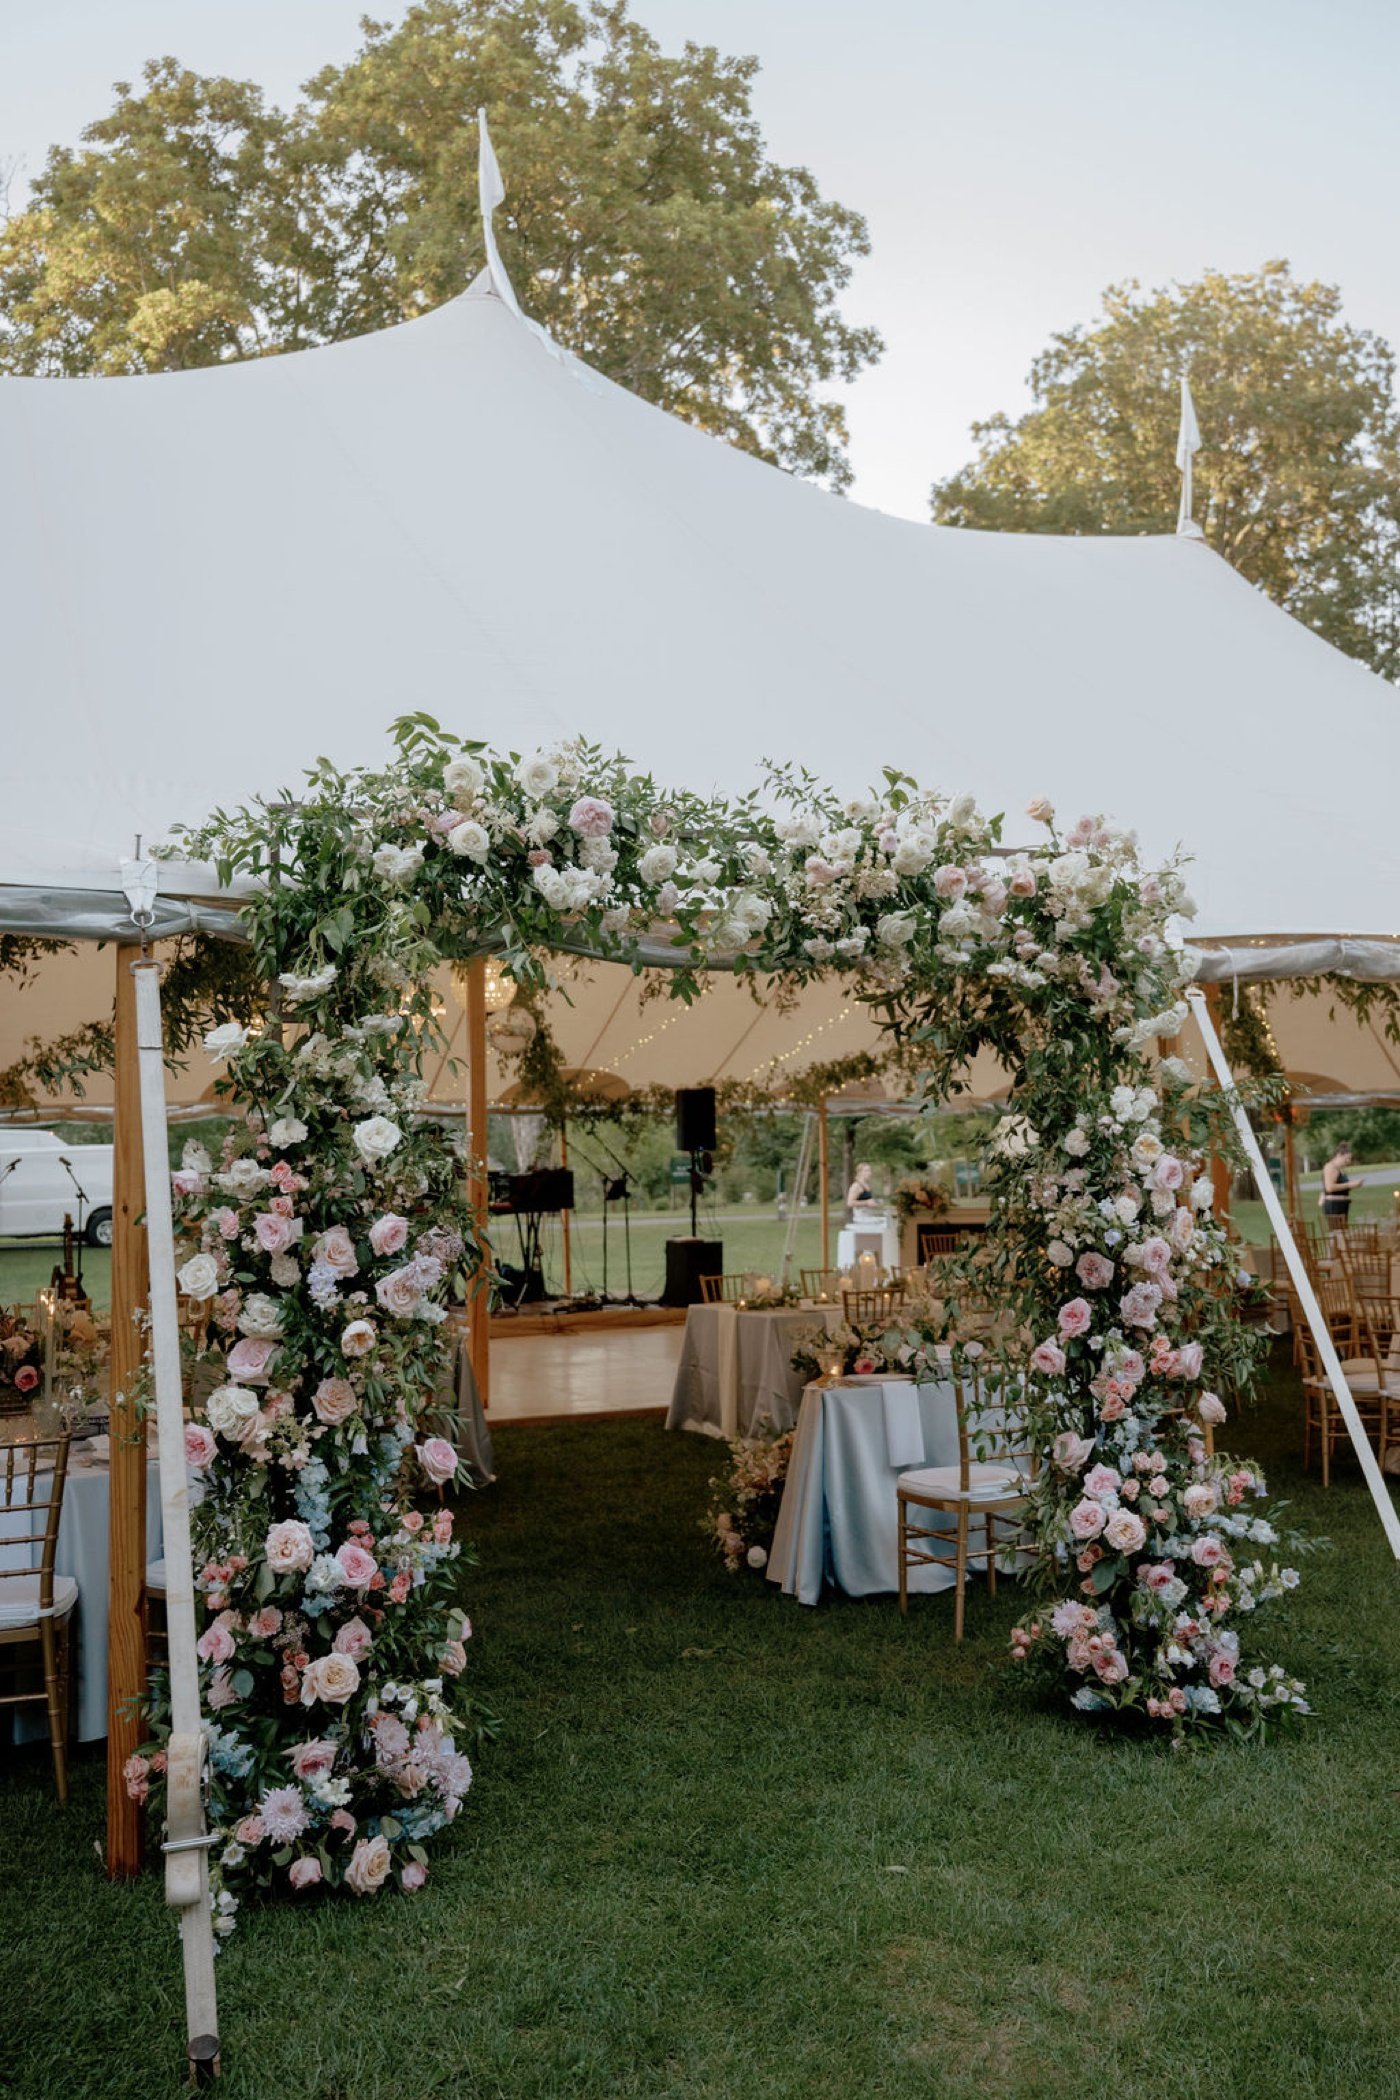 Floral archway with pink and white roses at the entrance to a tented wedding reception